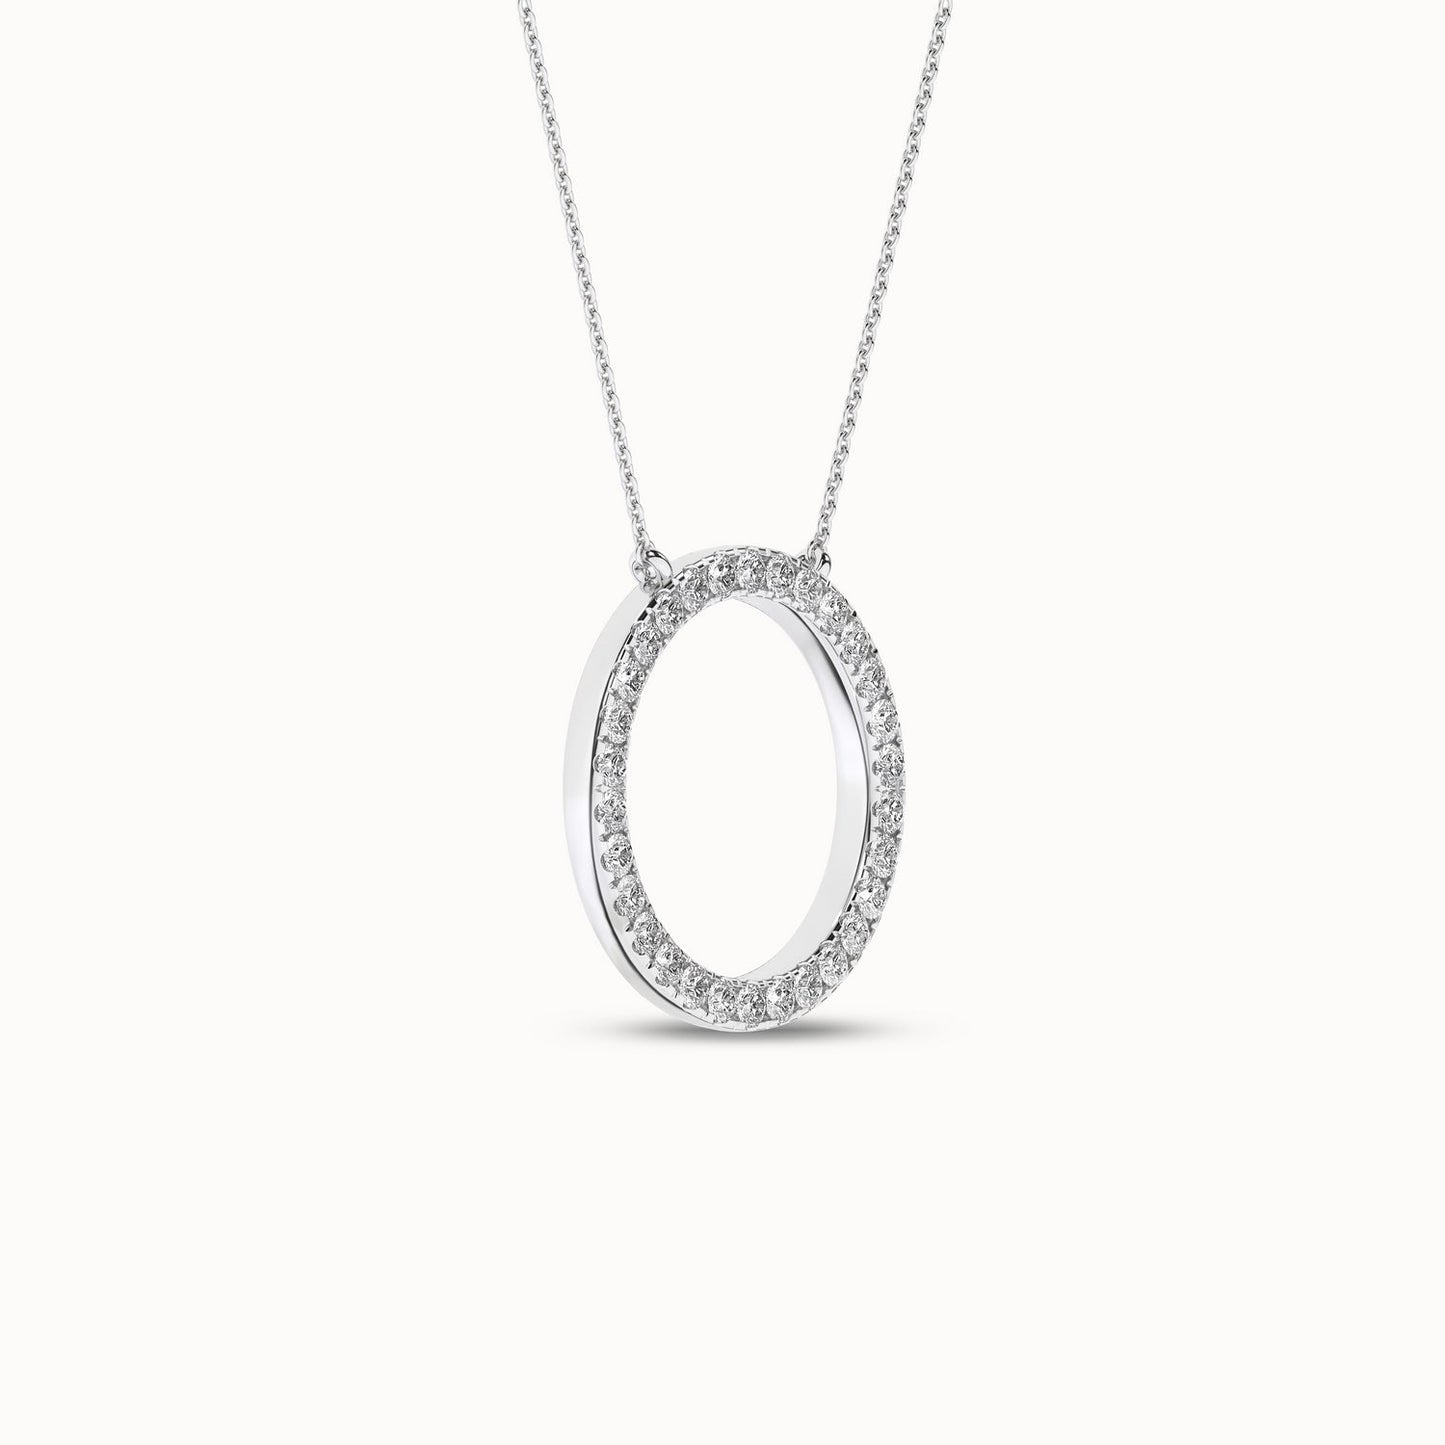 Circular Silhouette Necklace_Product Angle_1/3Ct. - 2